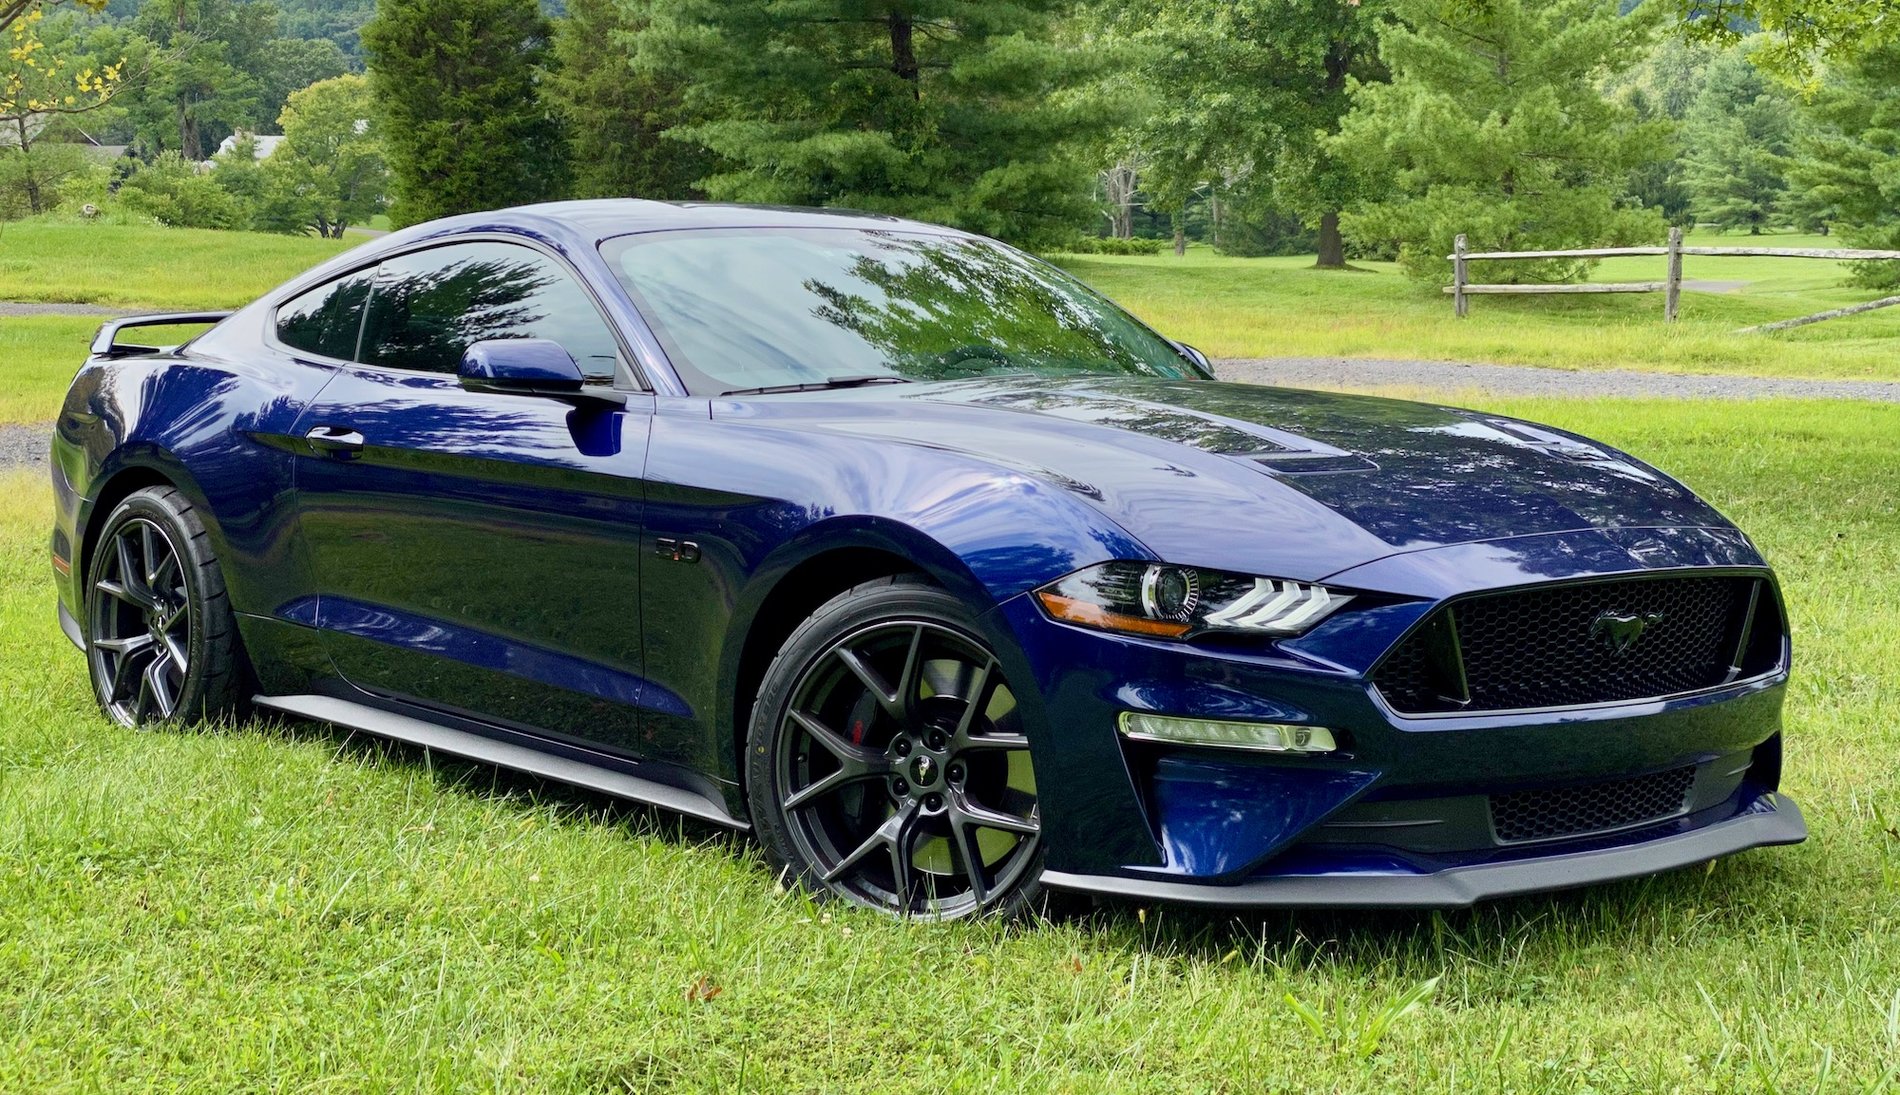 KONA BLUE S550 MUSTANG Thread | Page 16 | 2015+ S550 Mustang Forum (GT